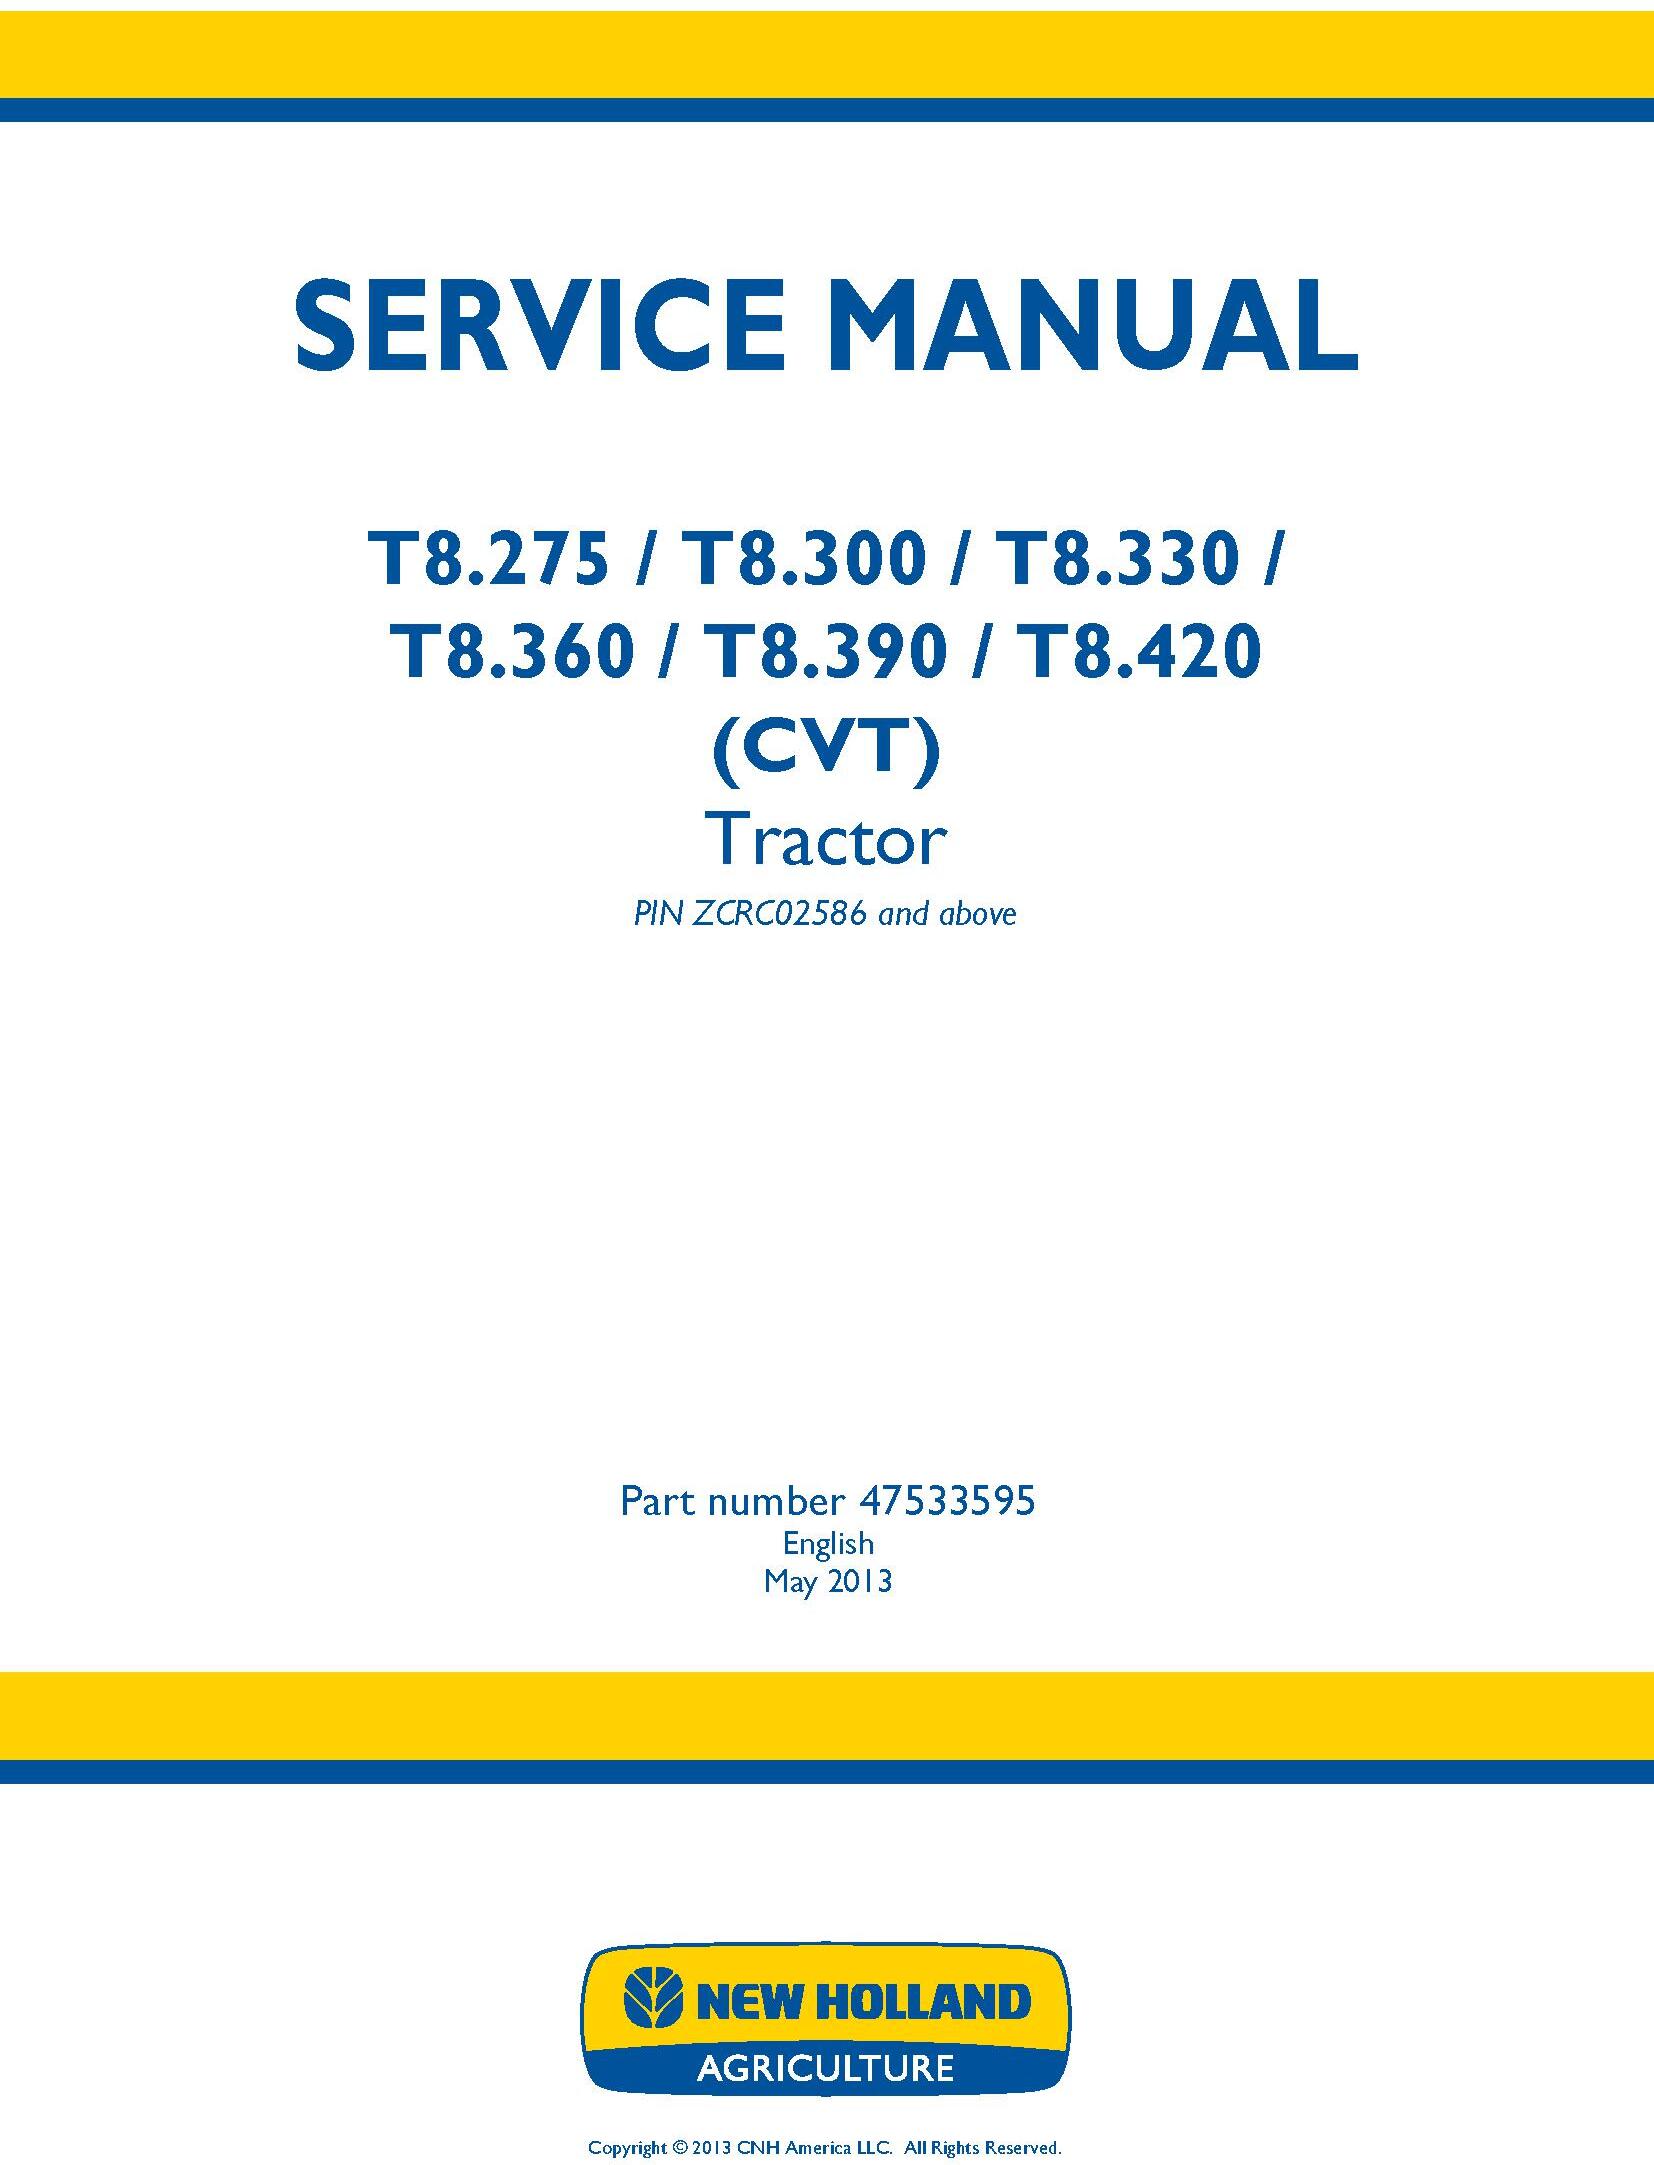 New Holland T8.275, T8.300, T8.330, T8.360, T8.390, T8.420 Tractor w.CVT Transmission Service Manual - 19390